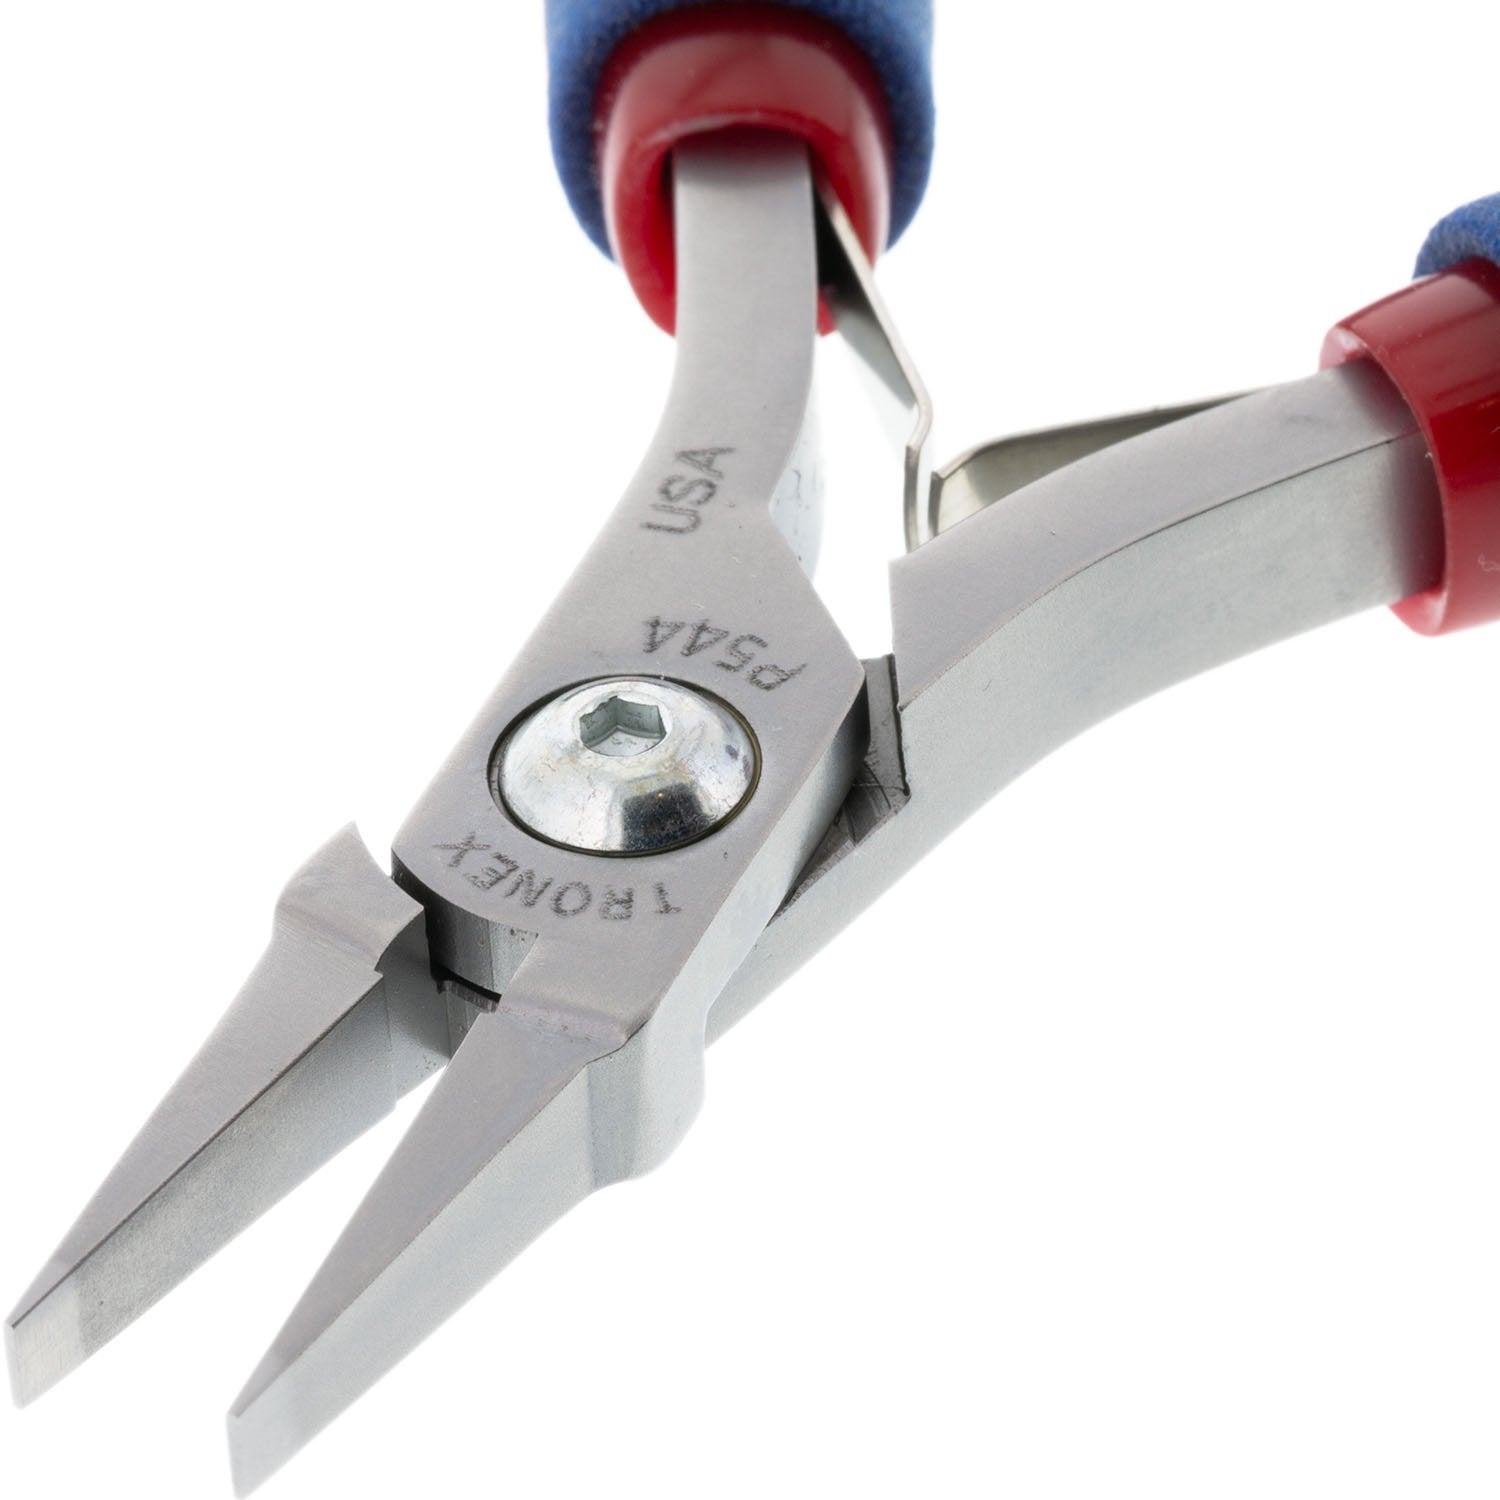 Flat Nose Pliers - Short Smooth Jaw